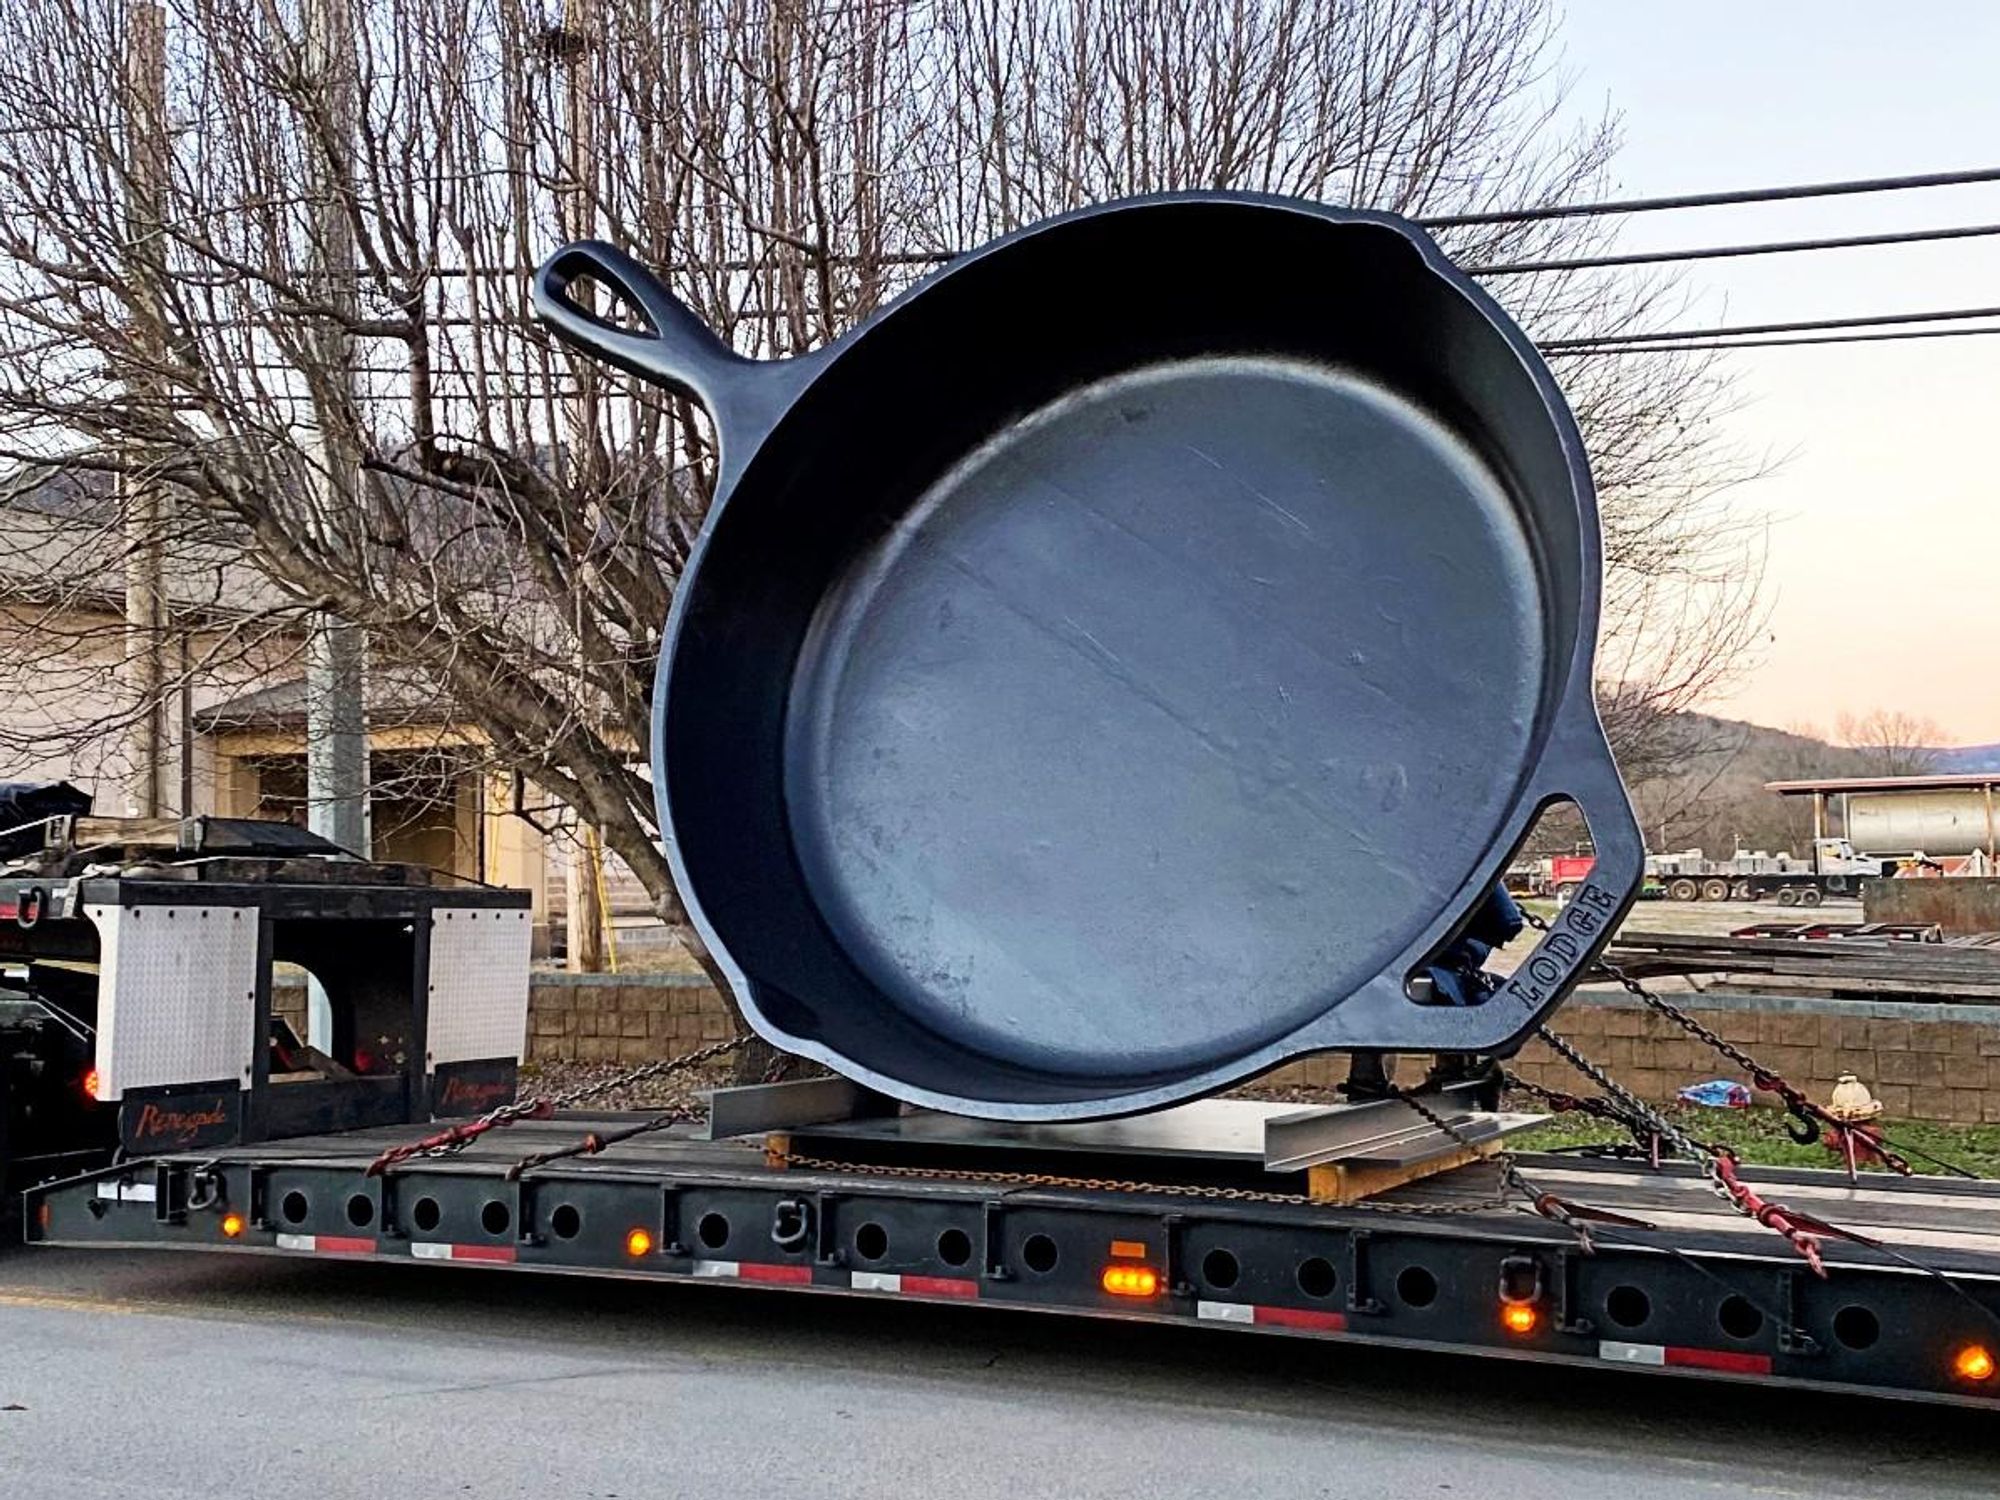 Watch the World's Largest Cast Iron Skillet Make Its Way to Lodge